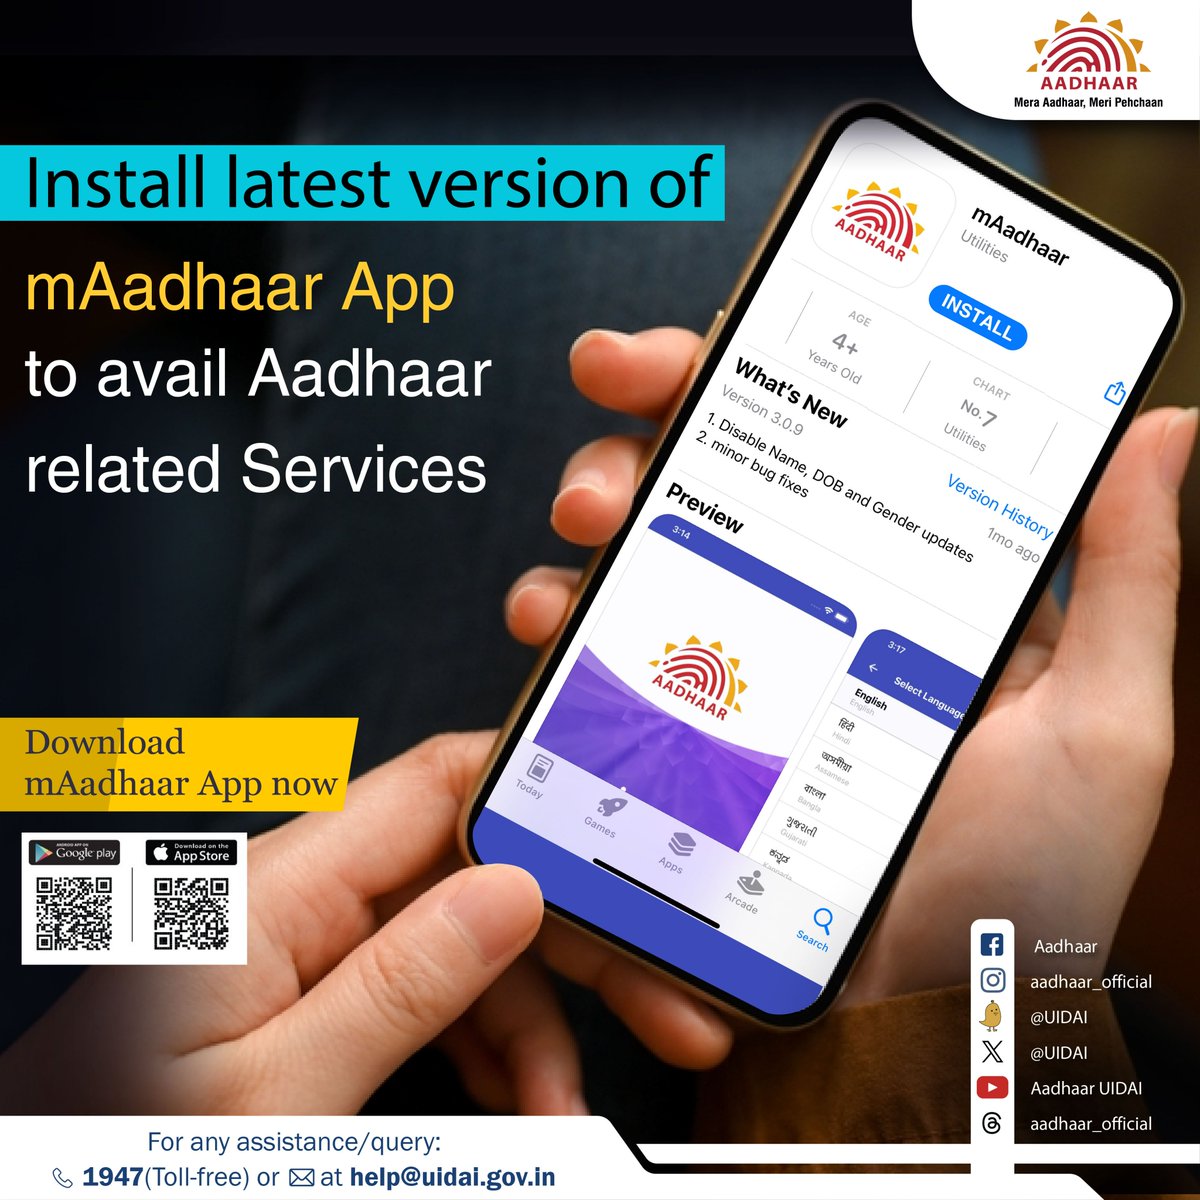 Install the latest version of #mAadhaarApp now from the Google Play Store or App Store to avail Aadhaar related services.